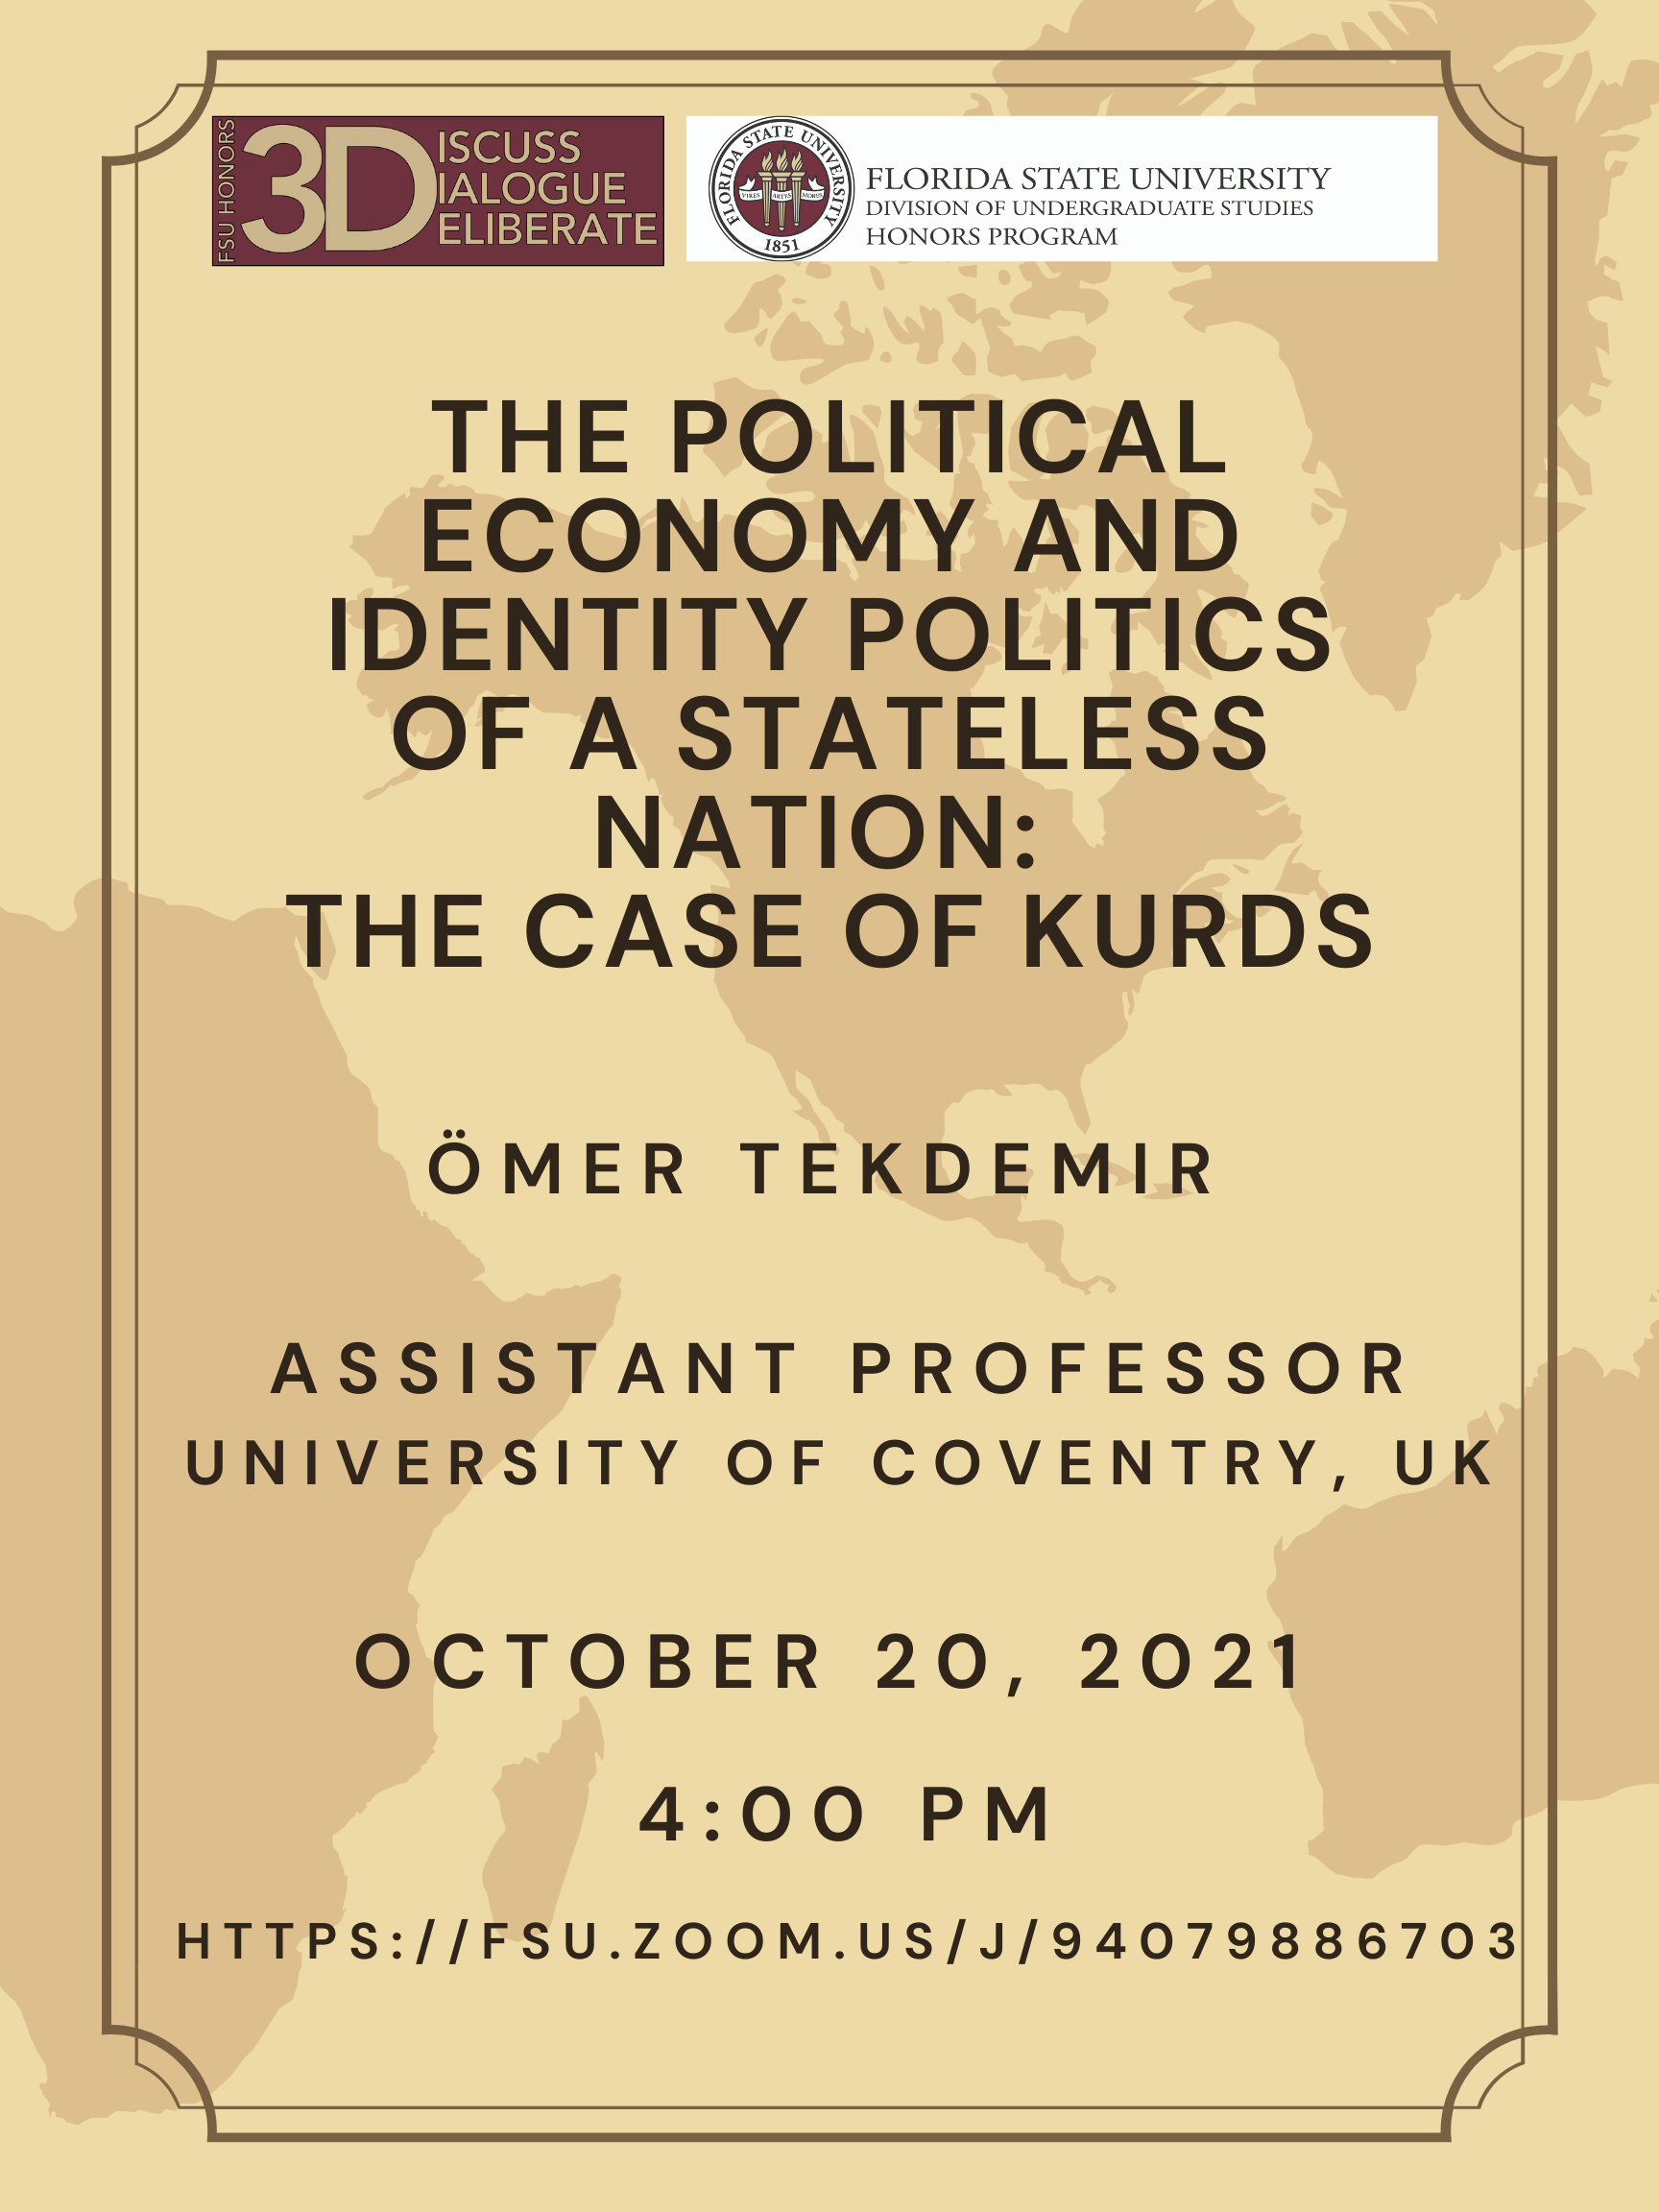 Flyer for The Political Economy and Identity Politics of a Stateless Nation: The Case of Kurds-October 20, 2021, 4:00 p.m. via Zoom-https://fsu.zoom.us/j/94079886703